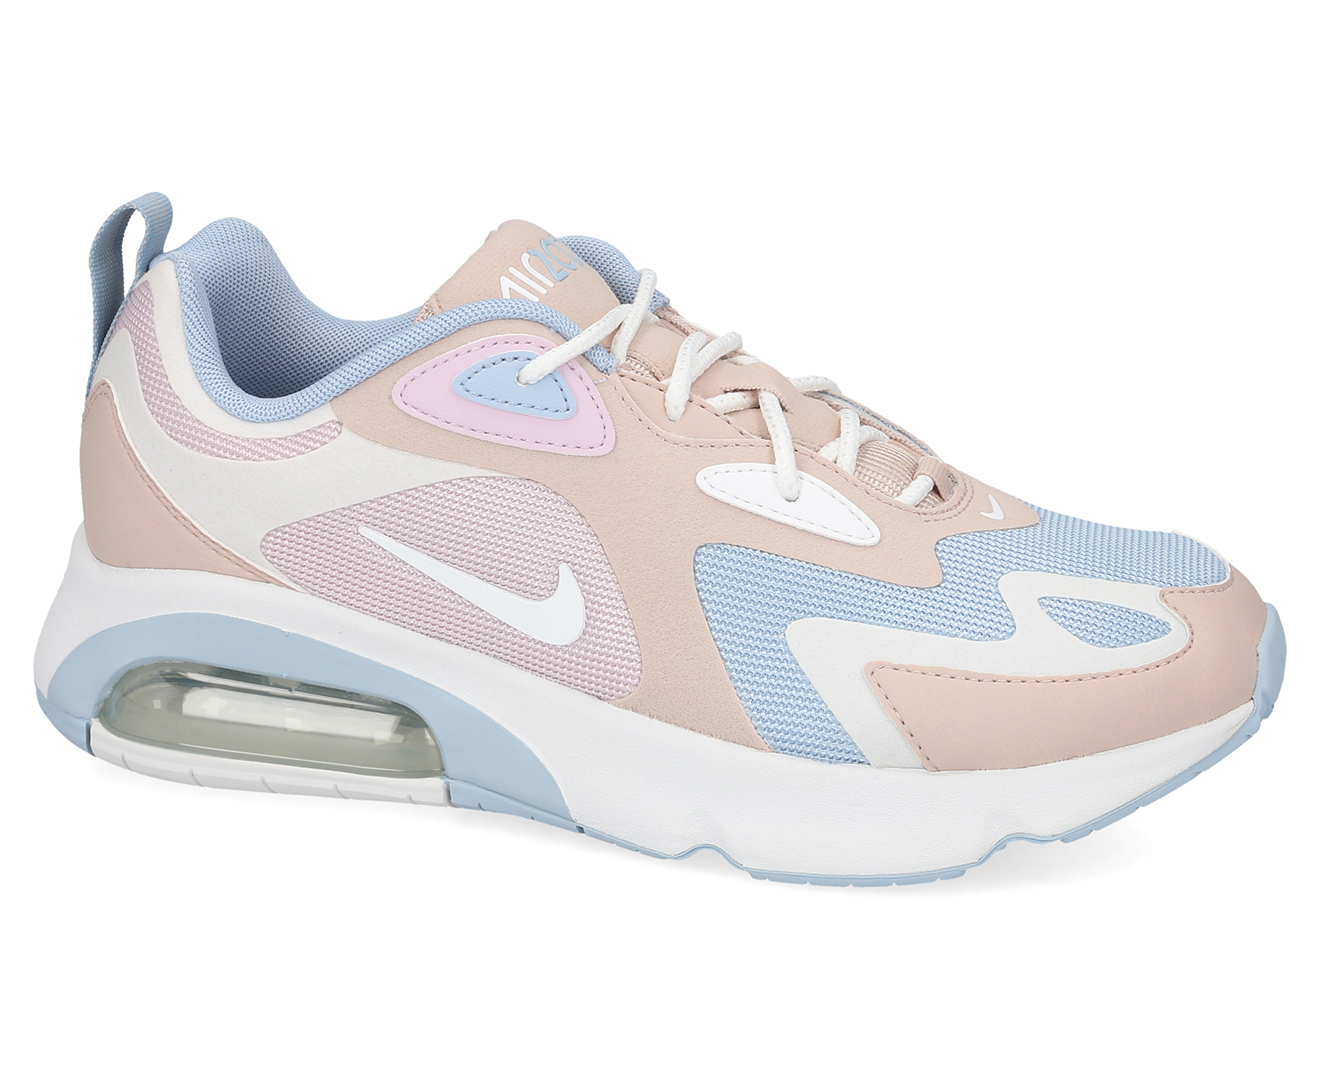 Nike Women's Air Max 200 Sneakers - Barely Rose/Summit White | Catch.co.nz